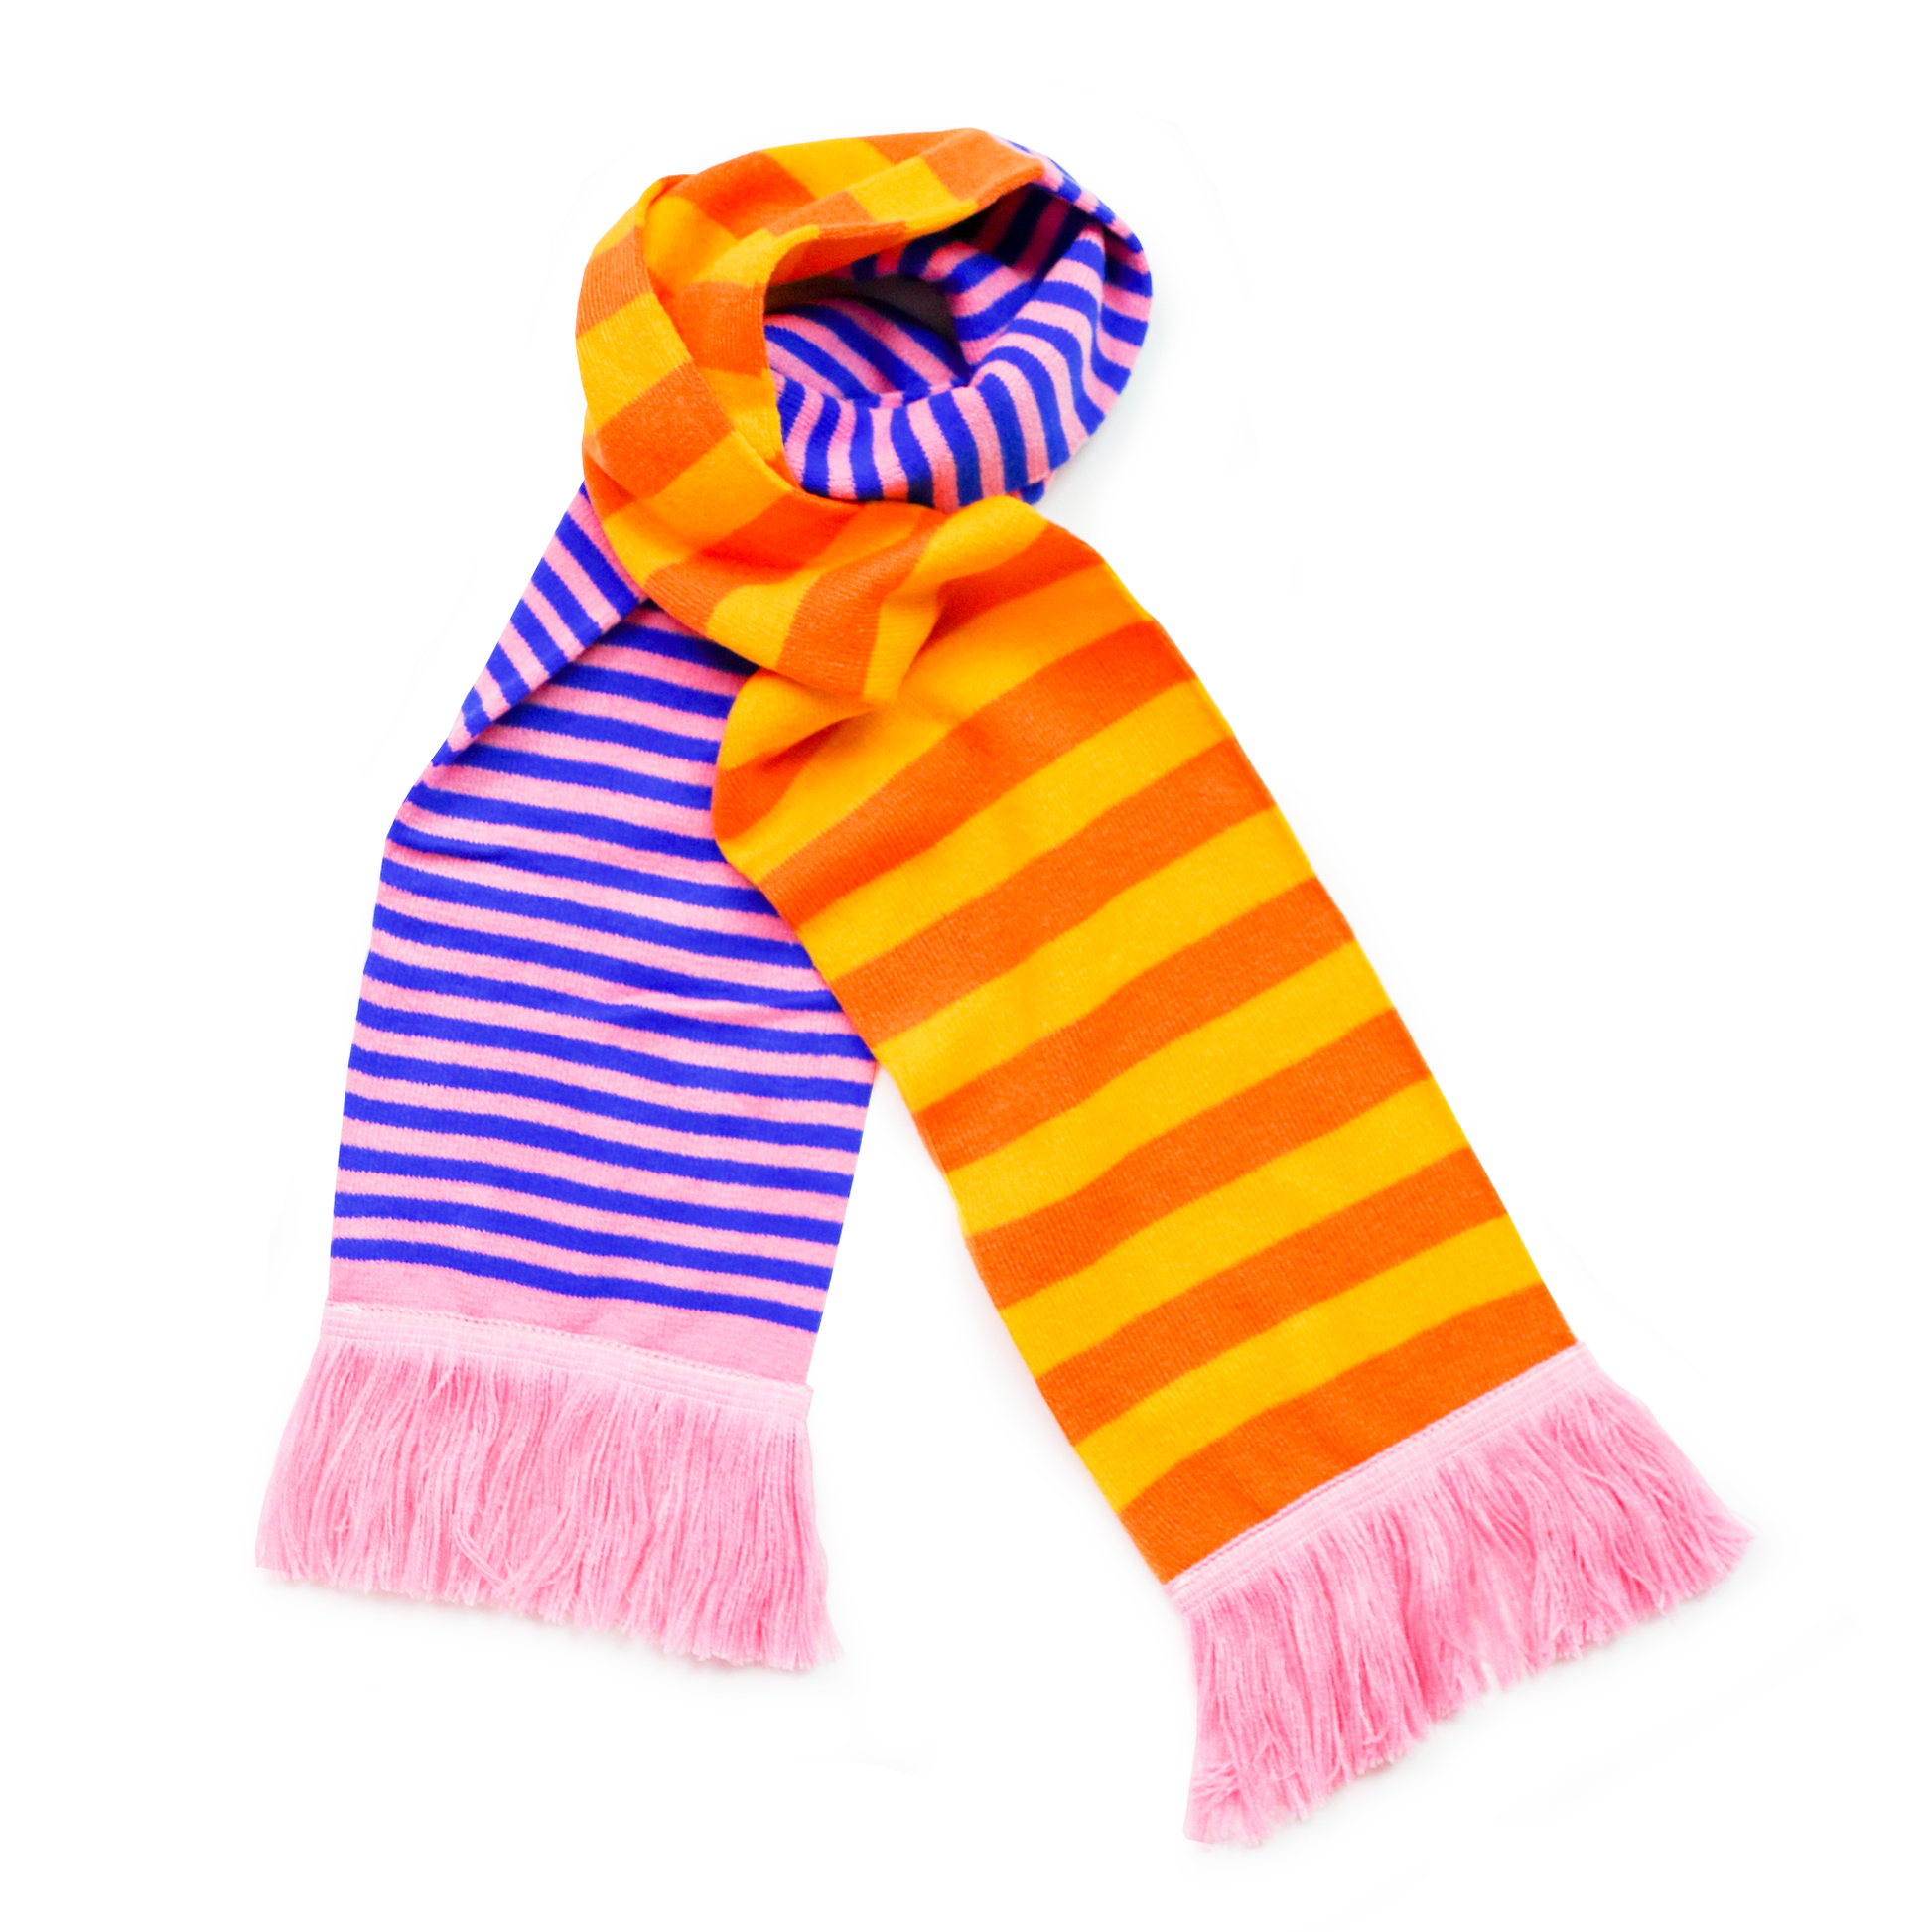 Striped, knitted scarf in bright colors. Features yellow, orange, pink and cobalt colors.